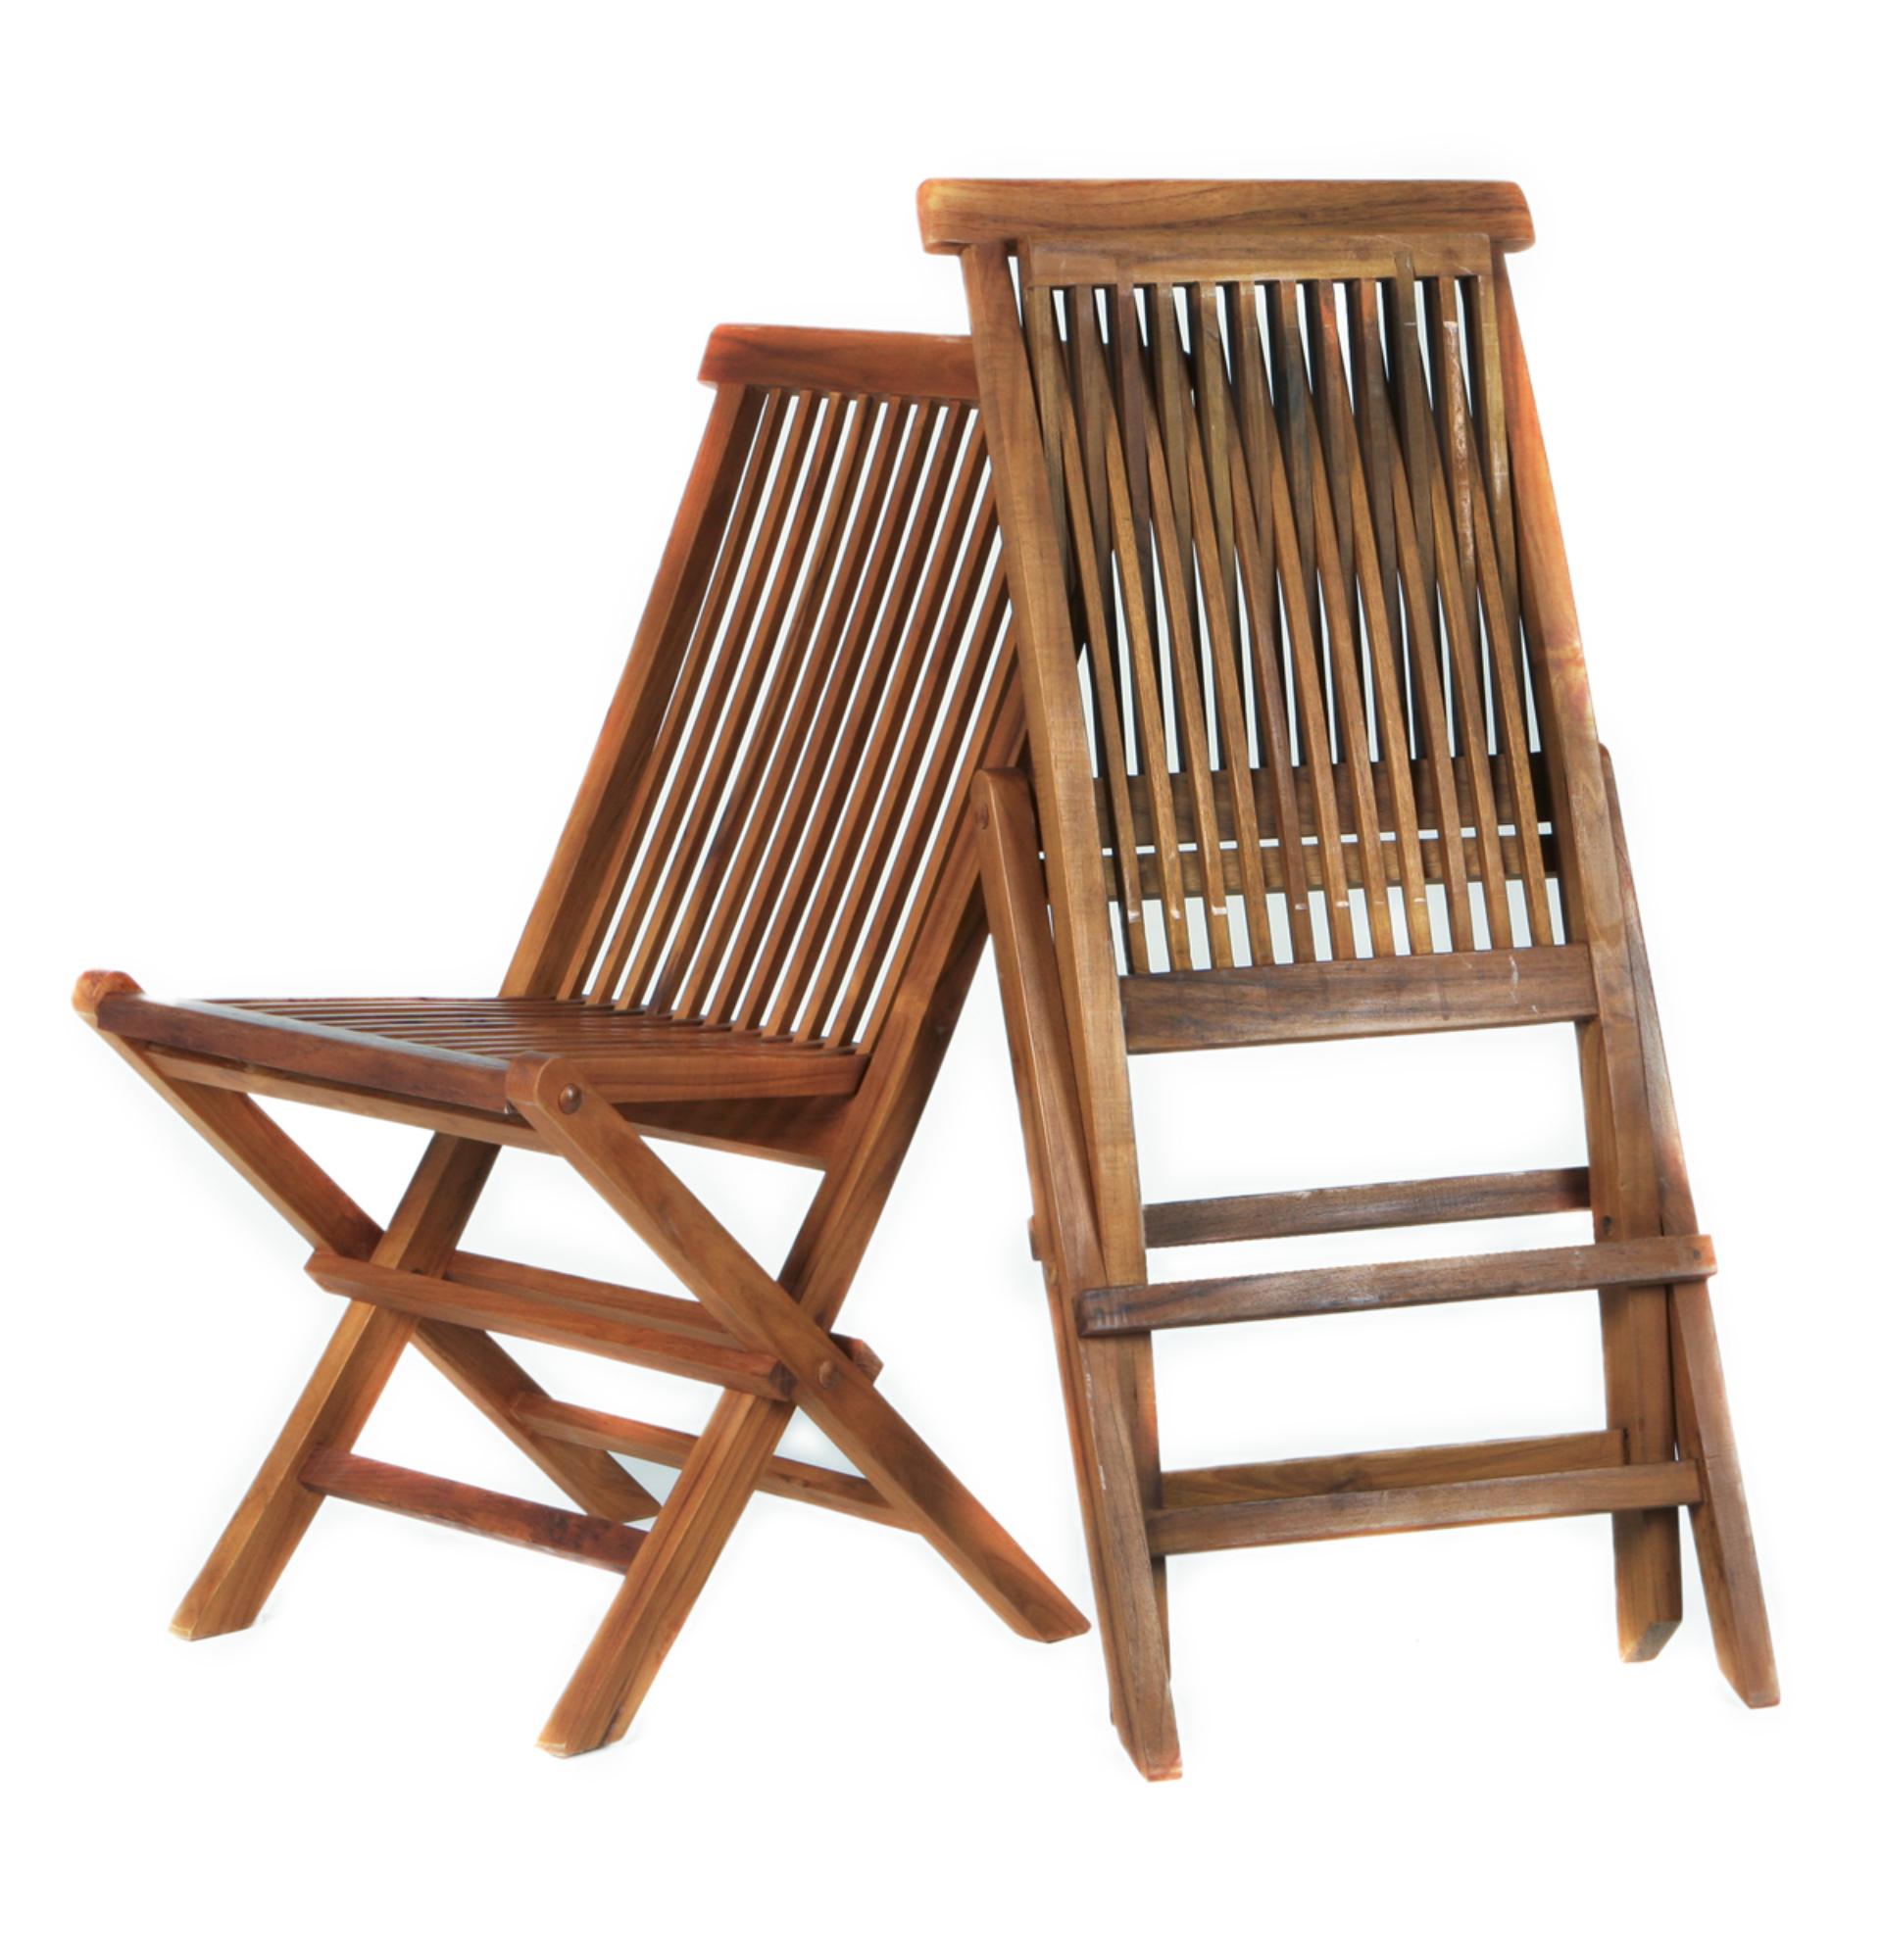 Folding Chair Set with Cushions